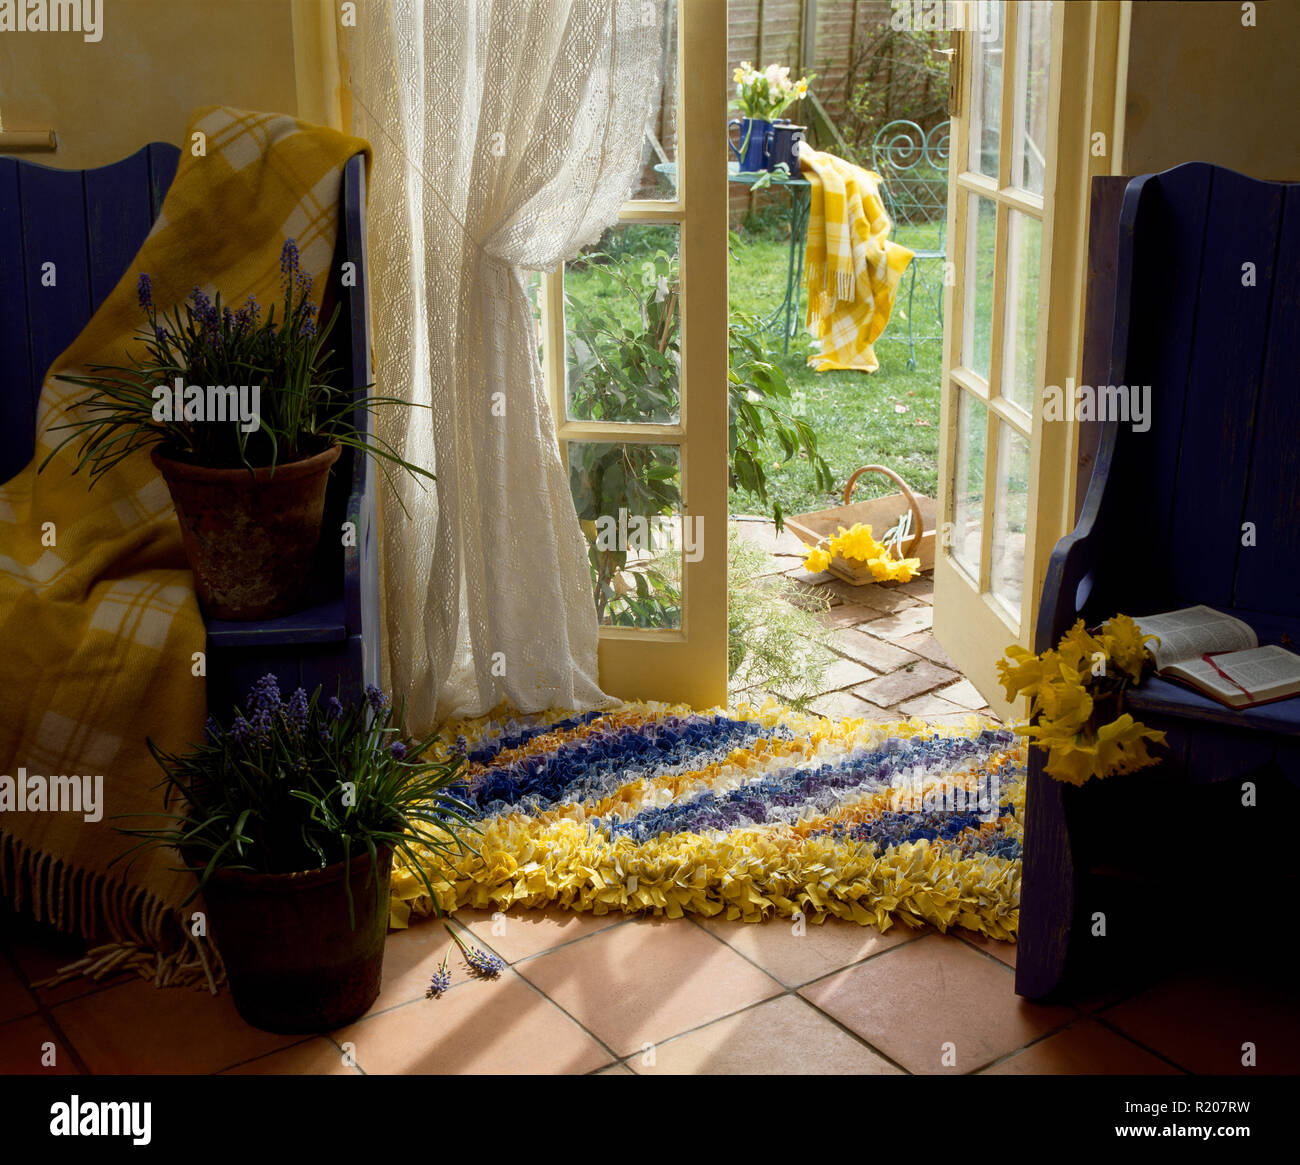 Yellow and blue rag rug on floor in front of French windows Stock Photo